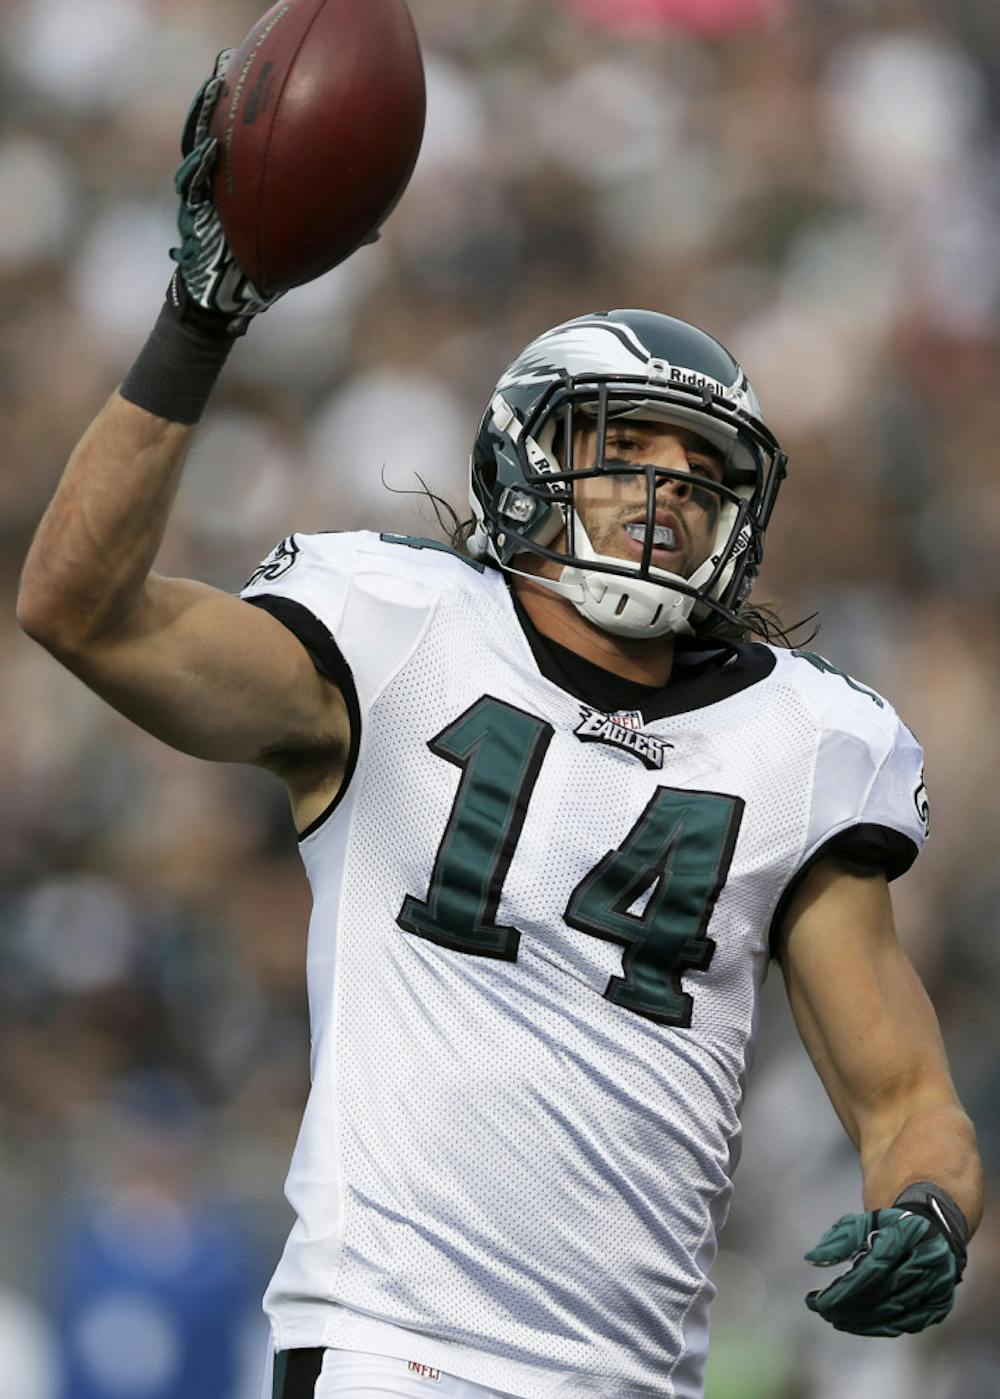 <p>Riley Cooper celebrates after catching a 63-yard touchdown pass during the Philadelphia Eagles’ 49-20 victory against the Oakland Raiders on Nov. 3.</p>